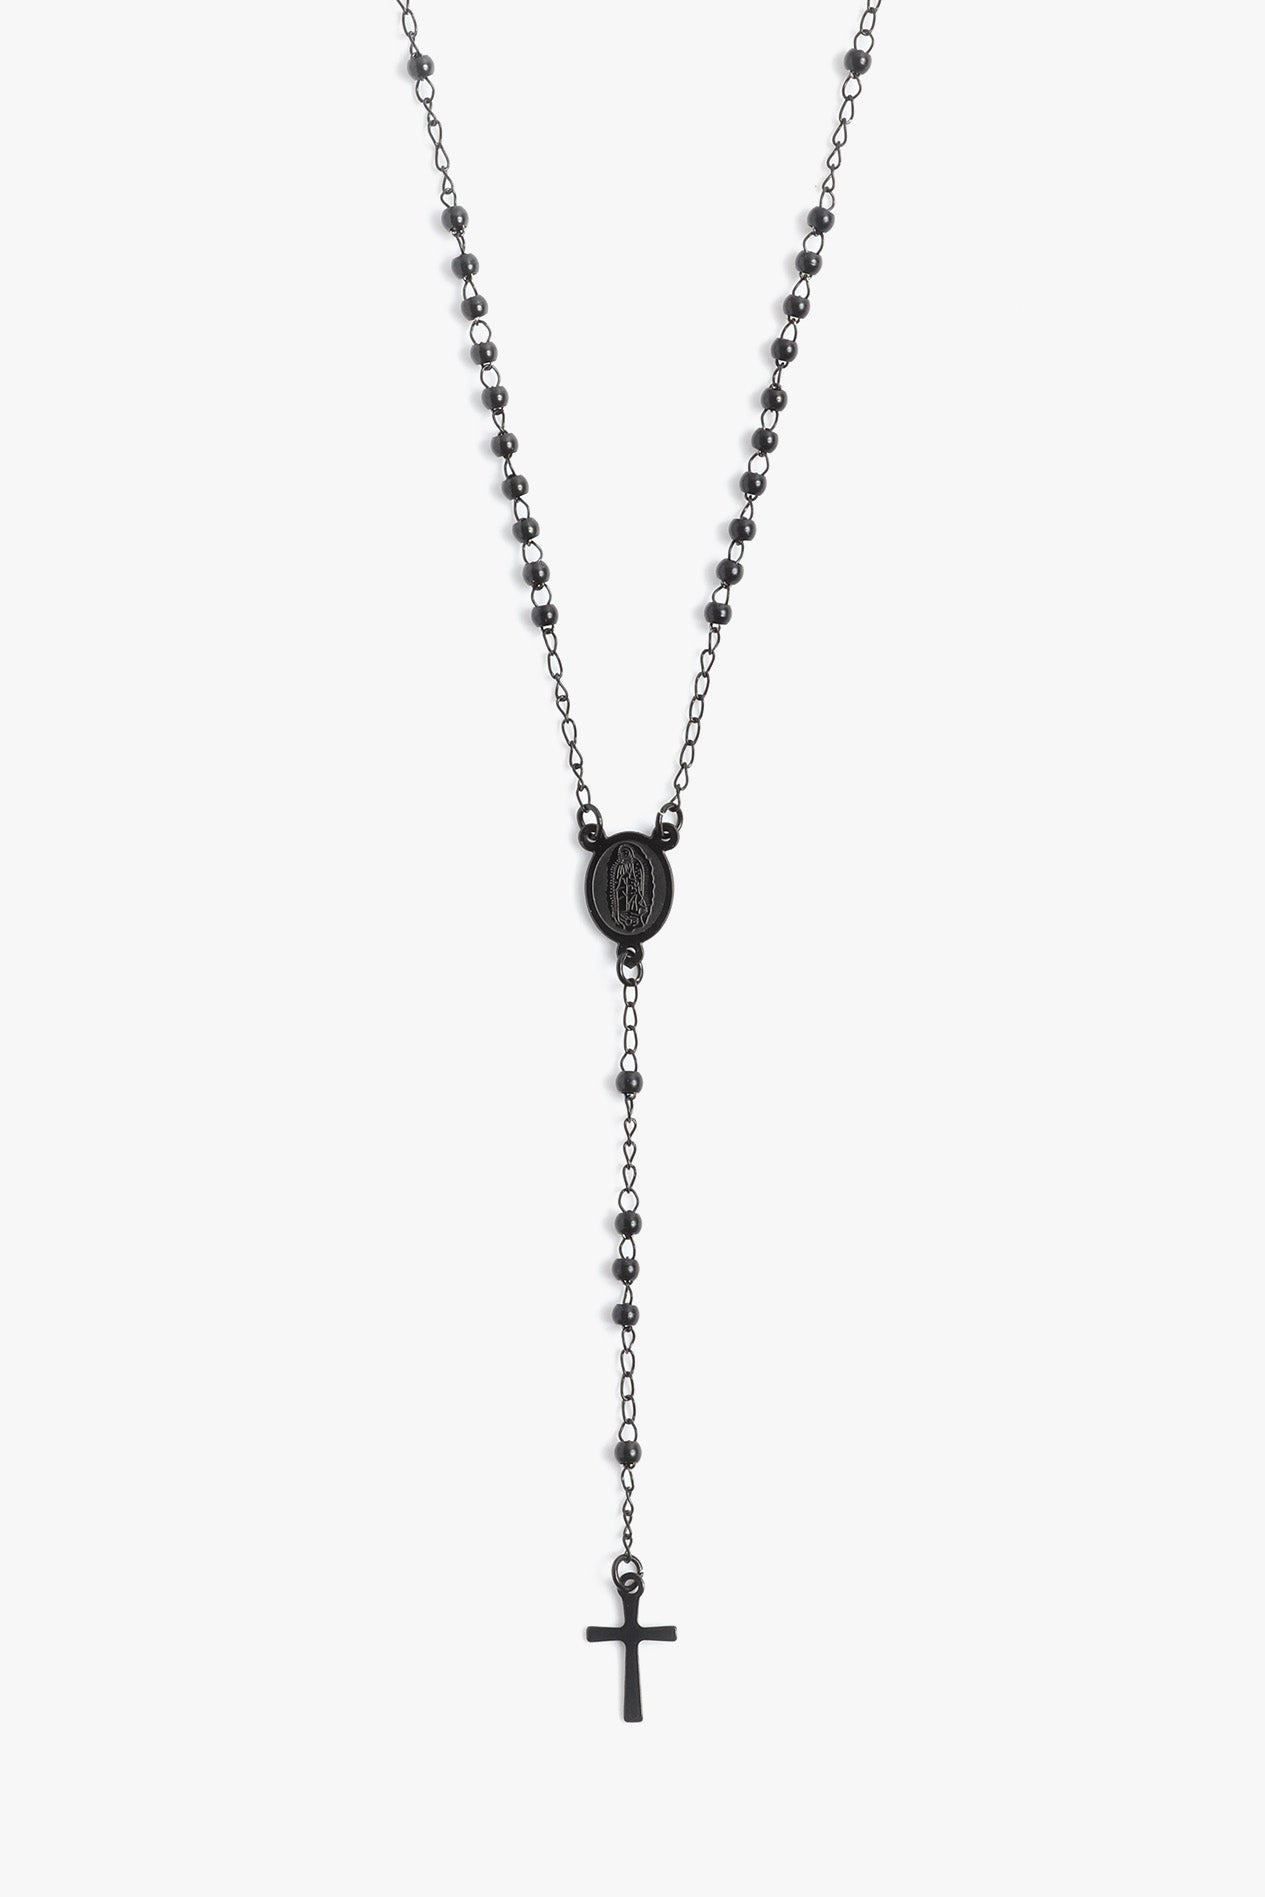 Marrin Costello Jewelry Ally Rosary functional for prayer beaded lariat with lobster clasp closure. Waterproof, sustainable, hypoallergenic. Black enamel plated stainless steel.